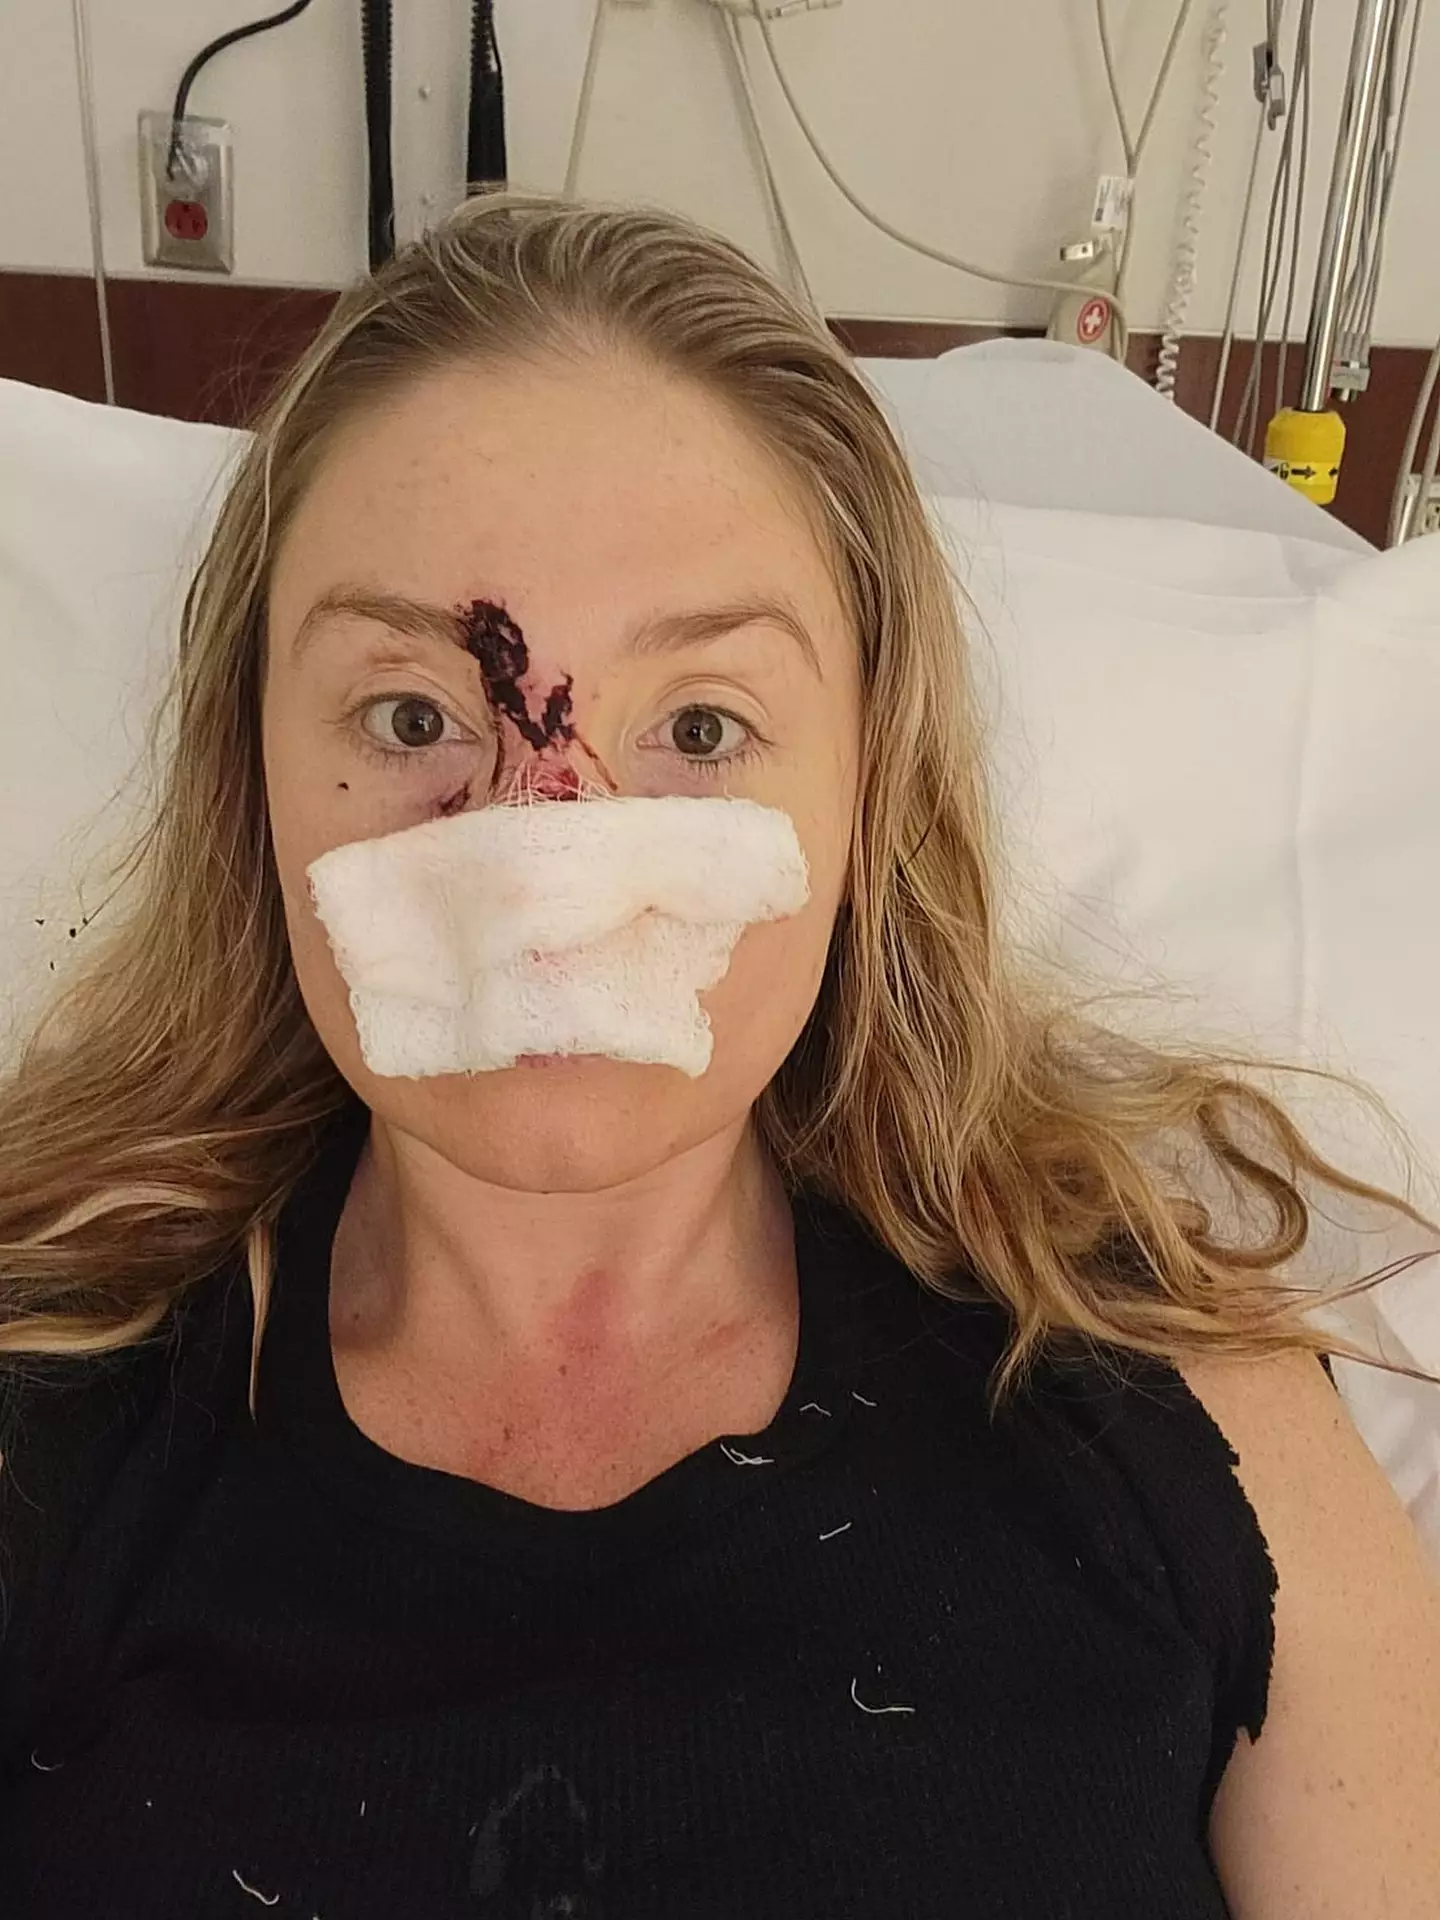 After the attack, Olivia felt for her nose but it 'wasn't there'.